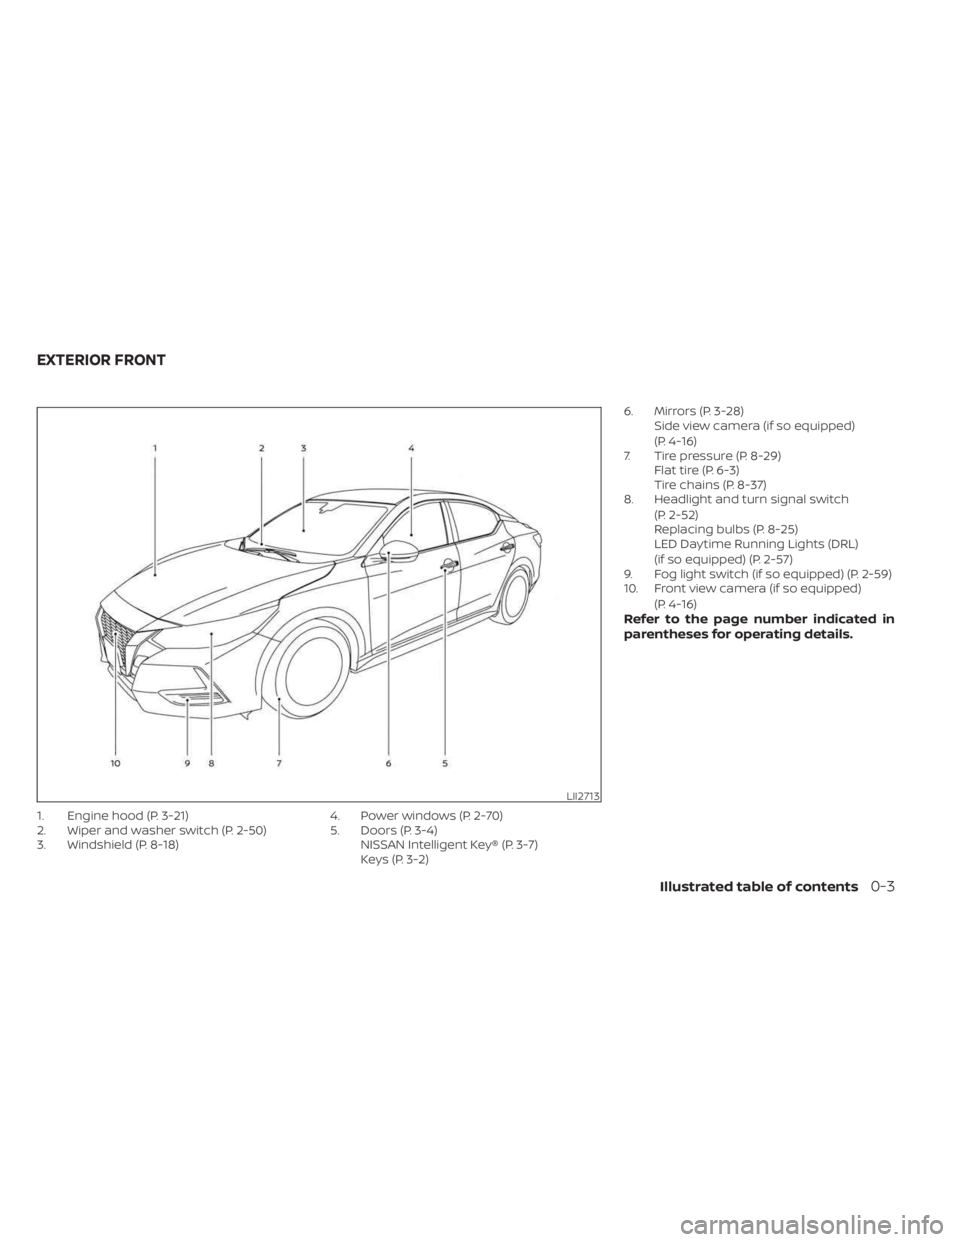 NISSAN SENTRA 2023  Owners Manual 1. Engine hood (P. 3-21)
2. Wiper and washer switch (P. 2-50)
3. Windshield (P. 8-18)4. Power windows (P. 2-70)
5. Doors (P. 3-4)
NISSAN Intelligent Key® (P. 3-7)
Keys (P. 3-2) 6. Mirrors (P. 3-28)
S